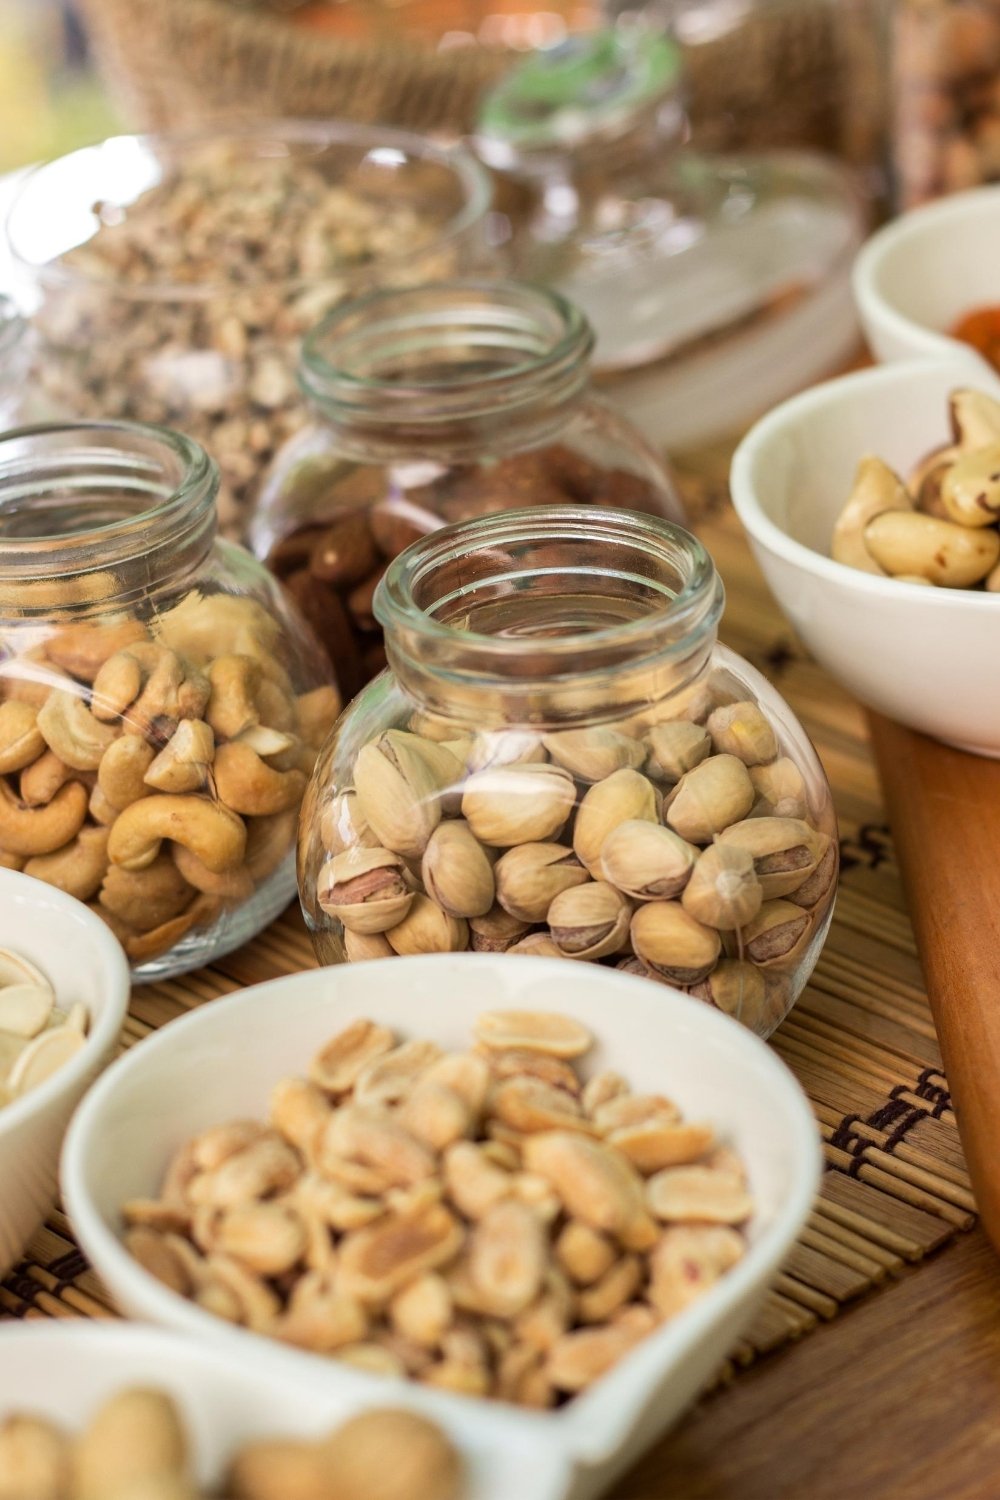 Naturally gluten free nut and seed assortment